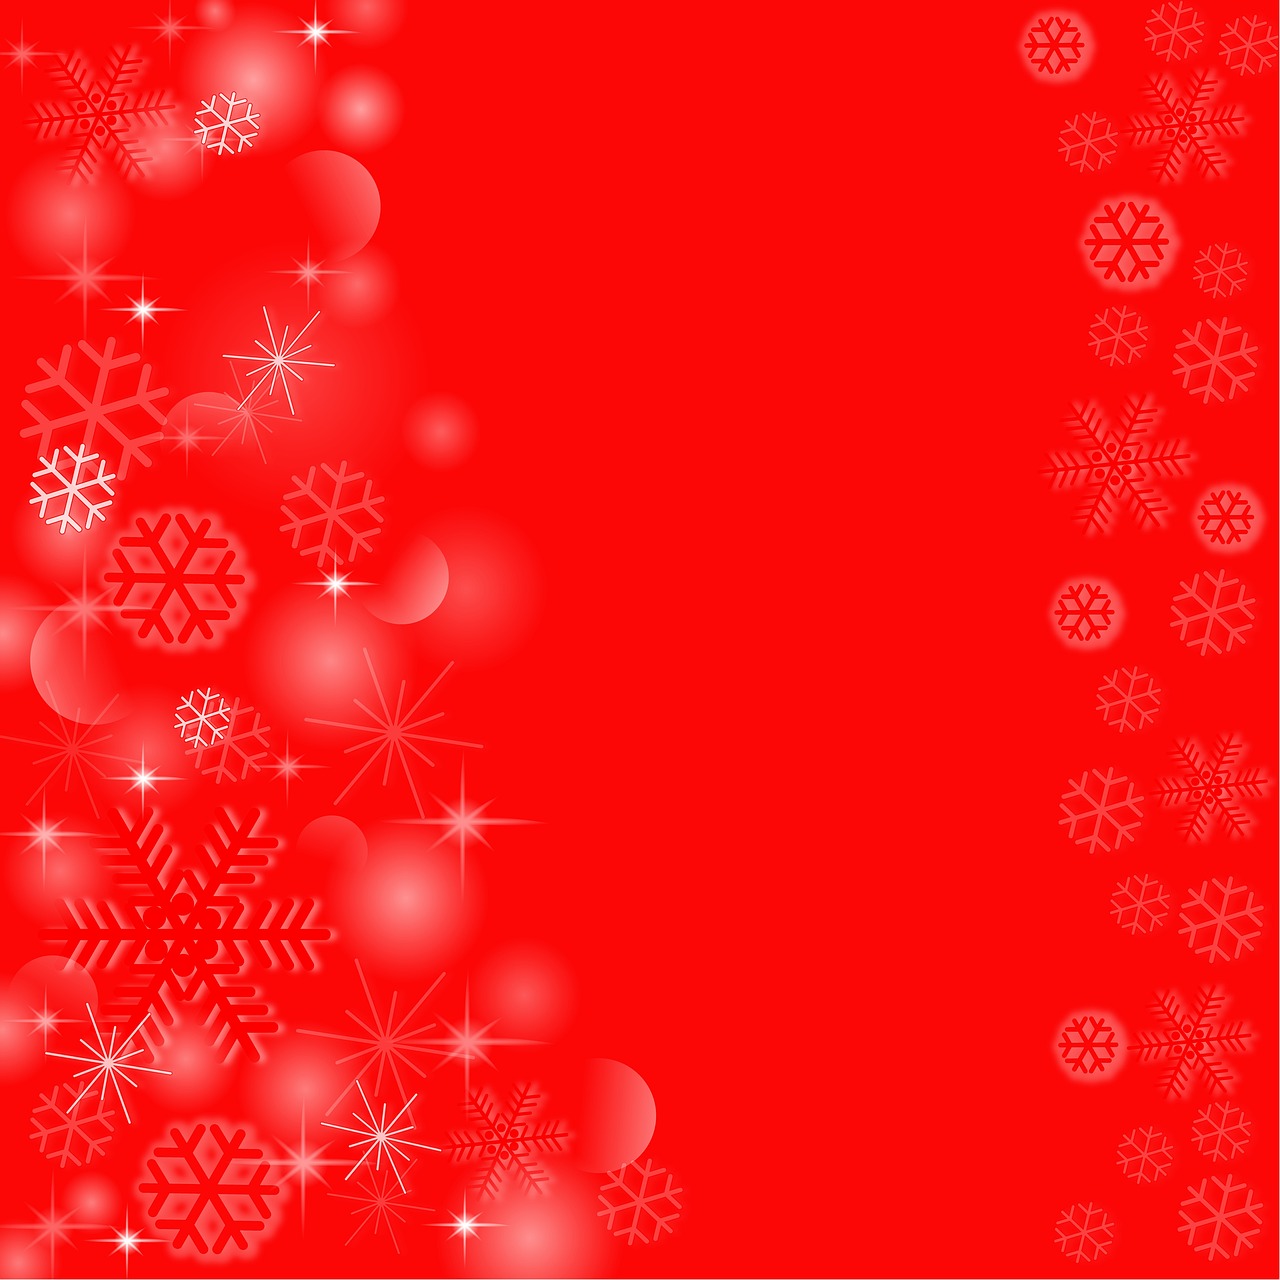 background red snowflakes free photo